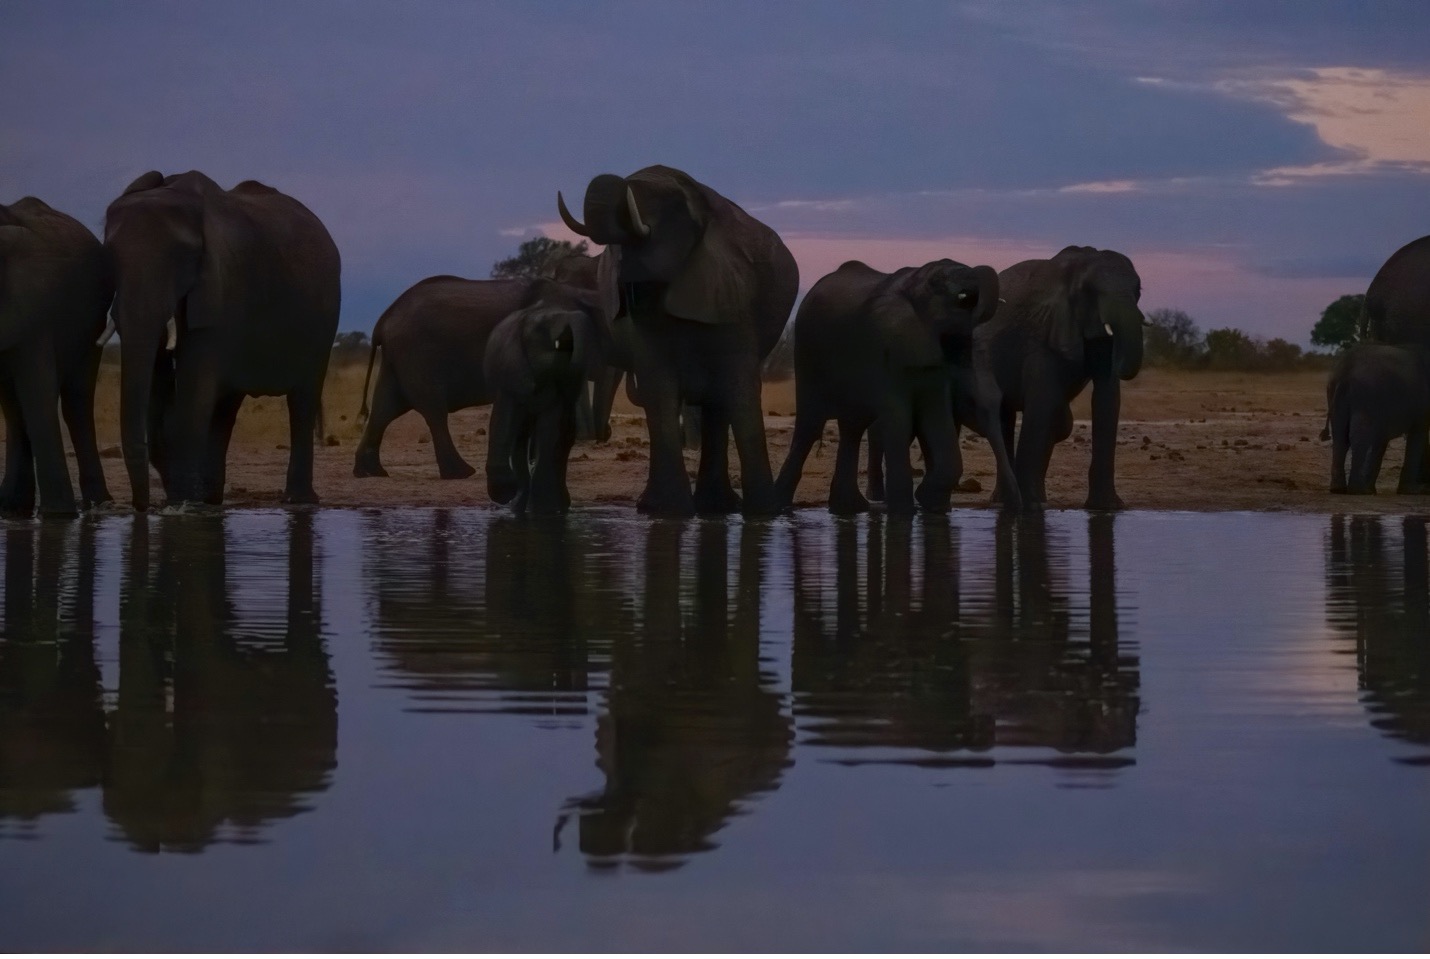 a herd of elephants drinks water from a watering hole at dusk